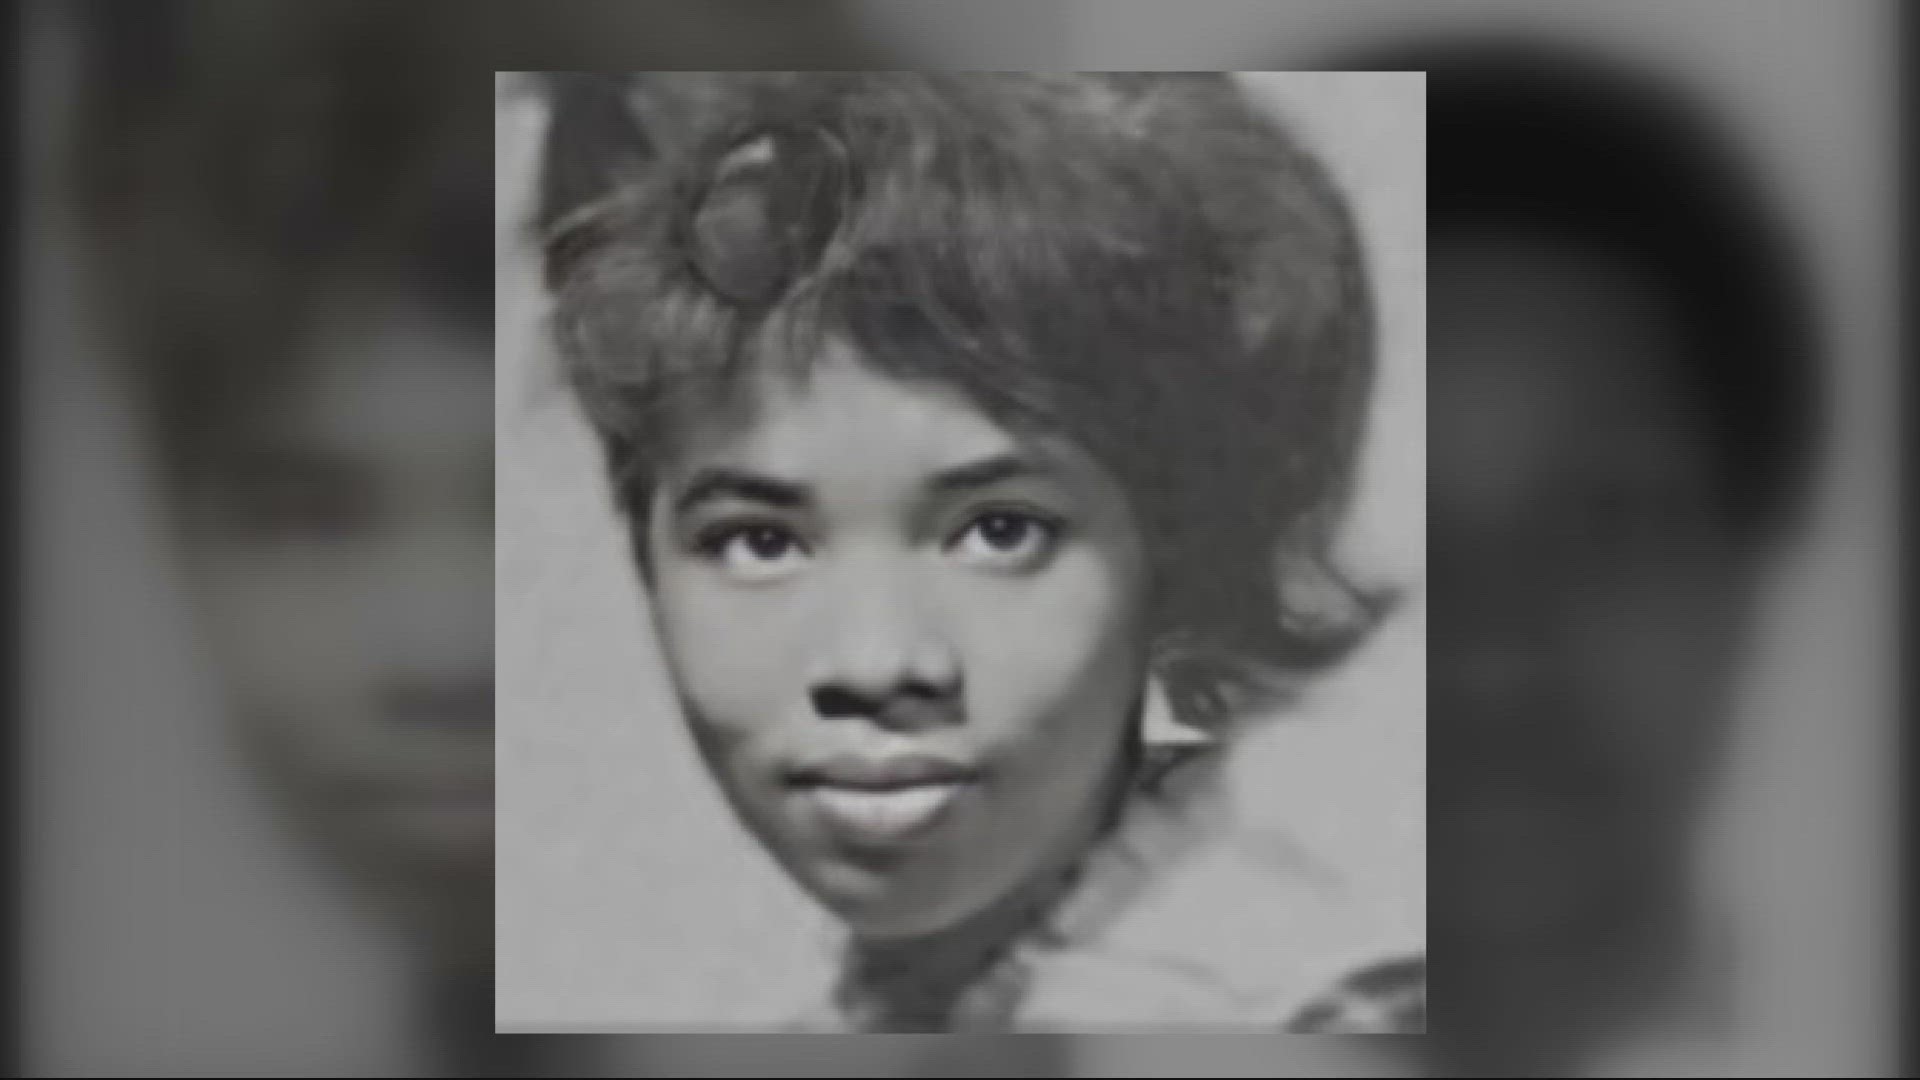 A Boy Scout leader had discovered the remains of Sandra Young on Feb. 23, 1970 on Sauvie Island.